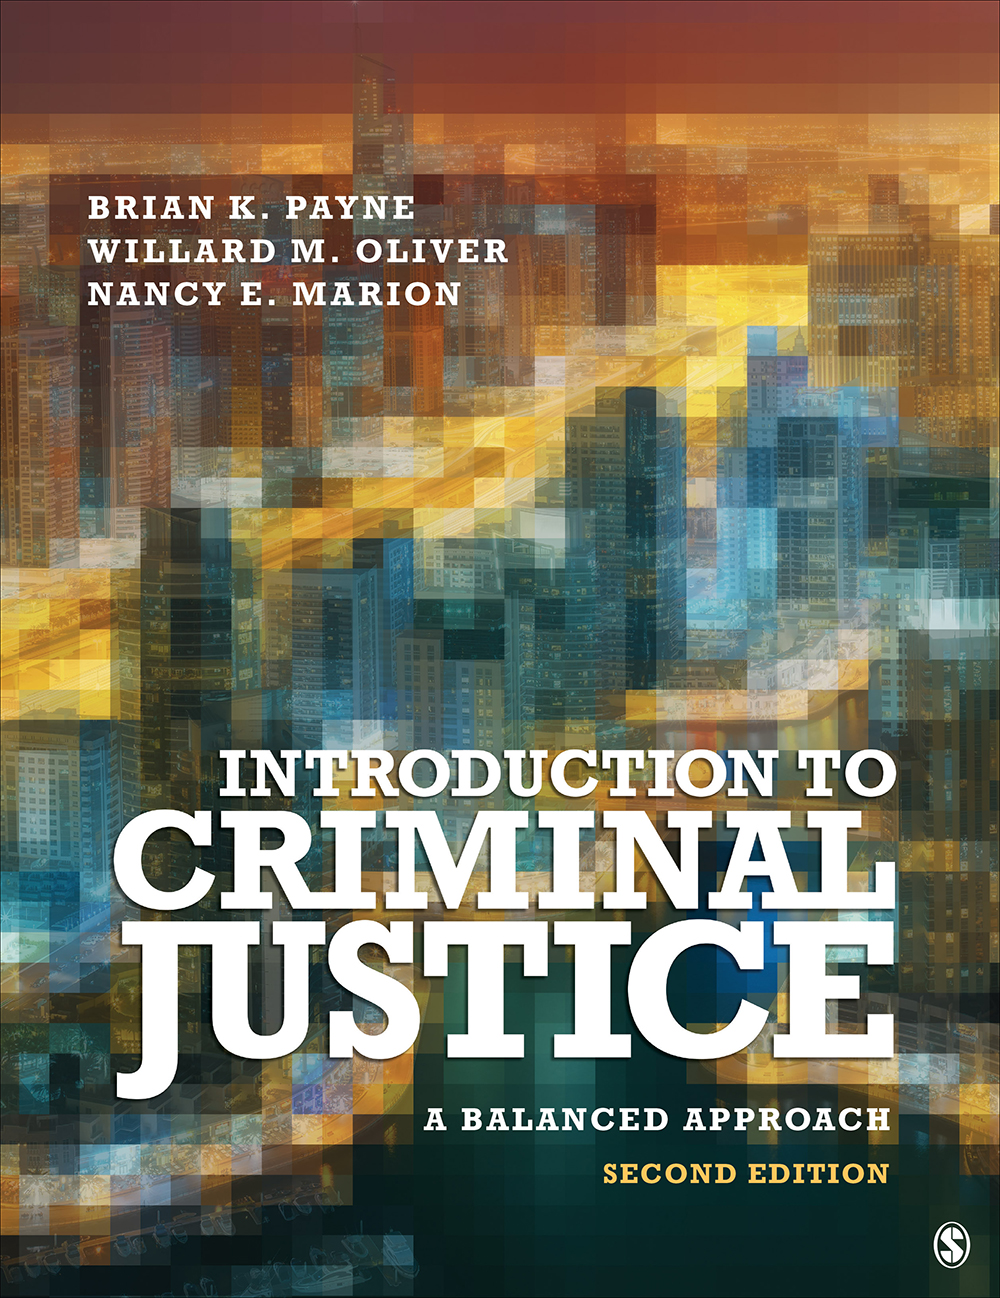 Introduction to Criminal Justice: A Balanced Approach (2nd Edition) - eBook